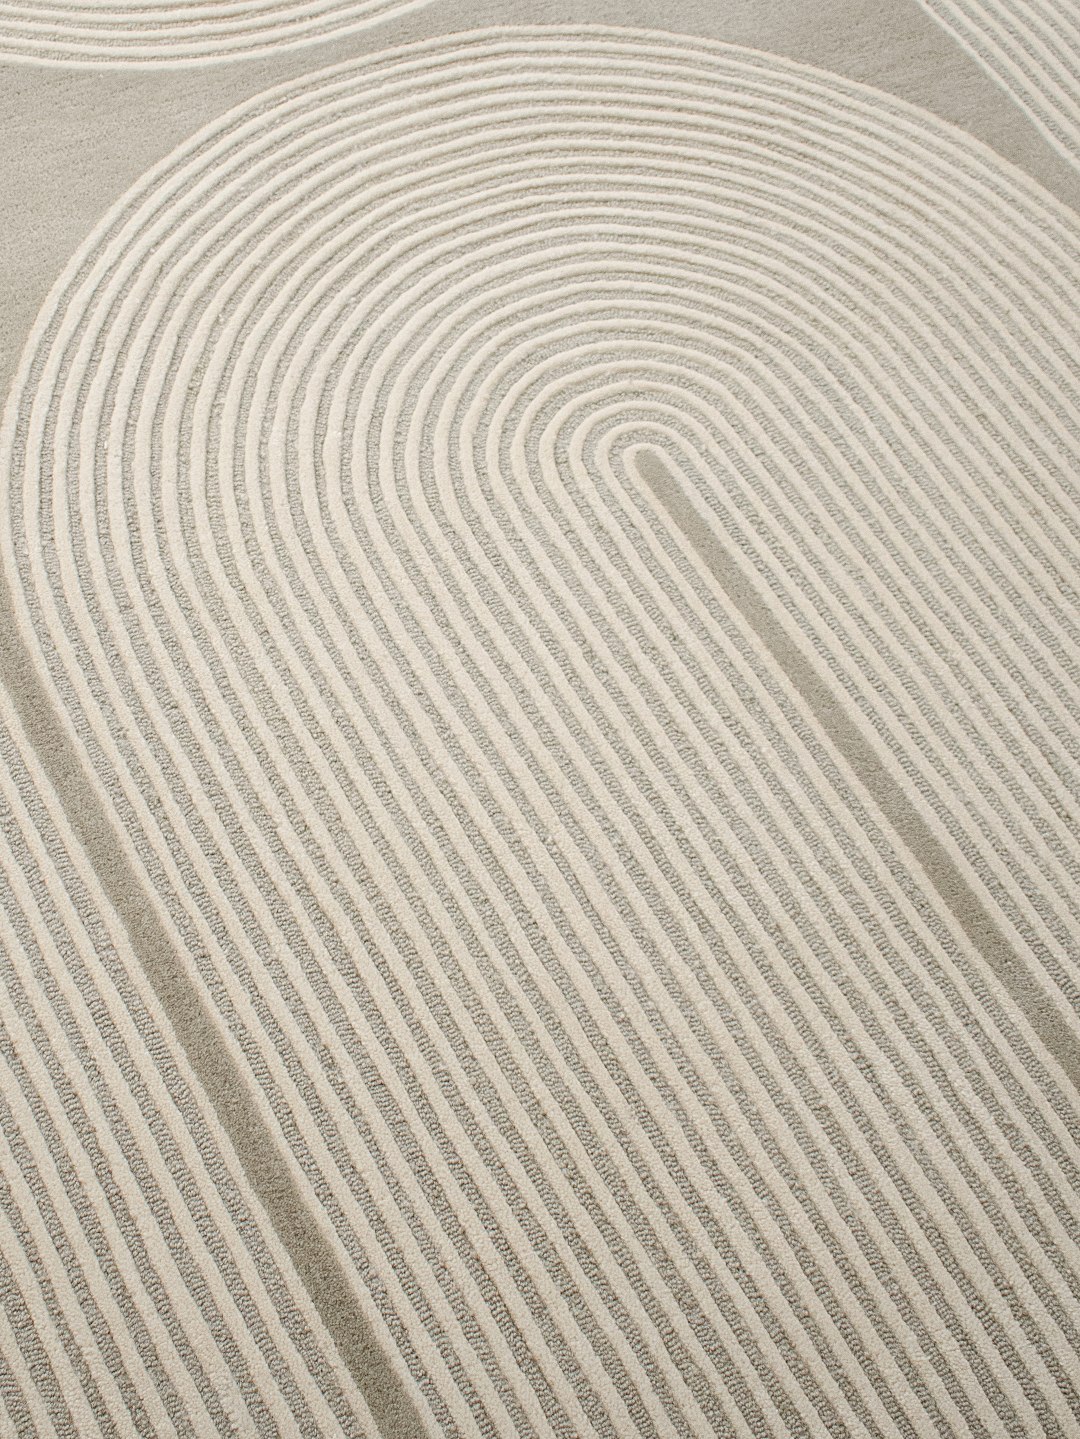 Viper Pattern Rug in wool in ivory and grey